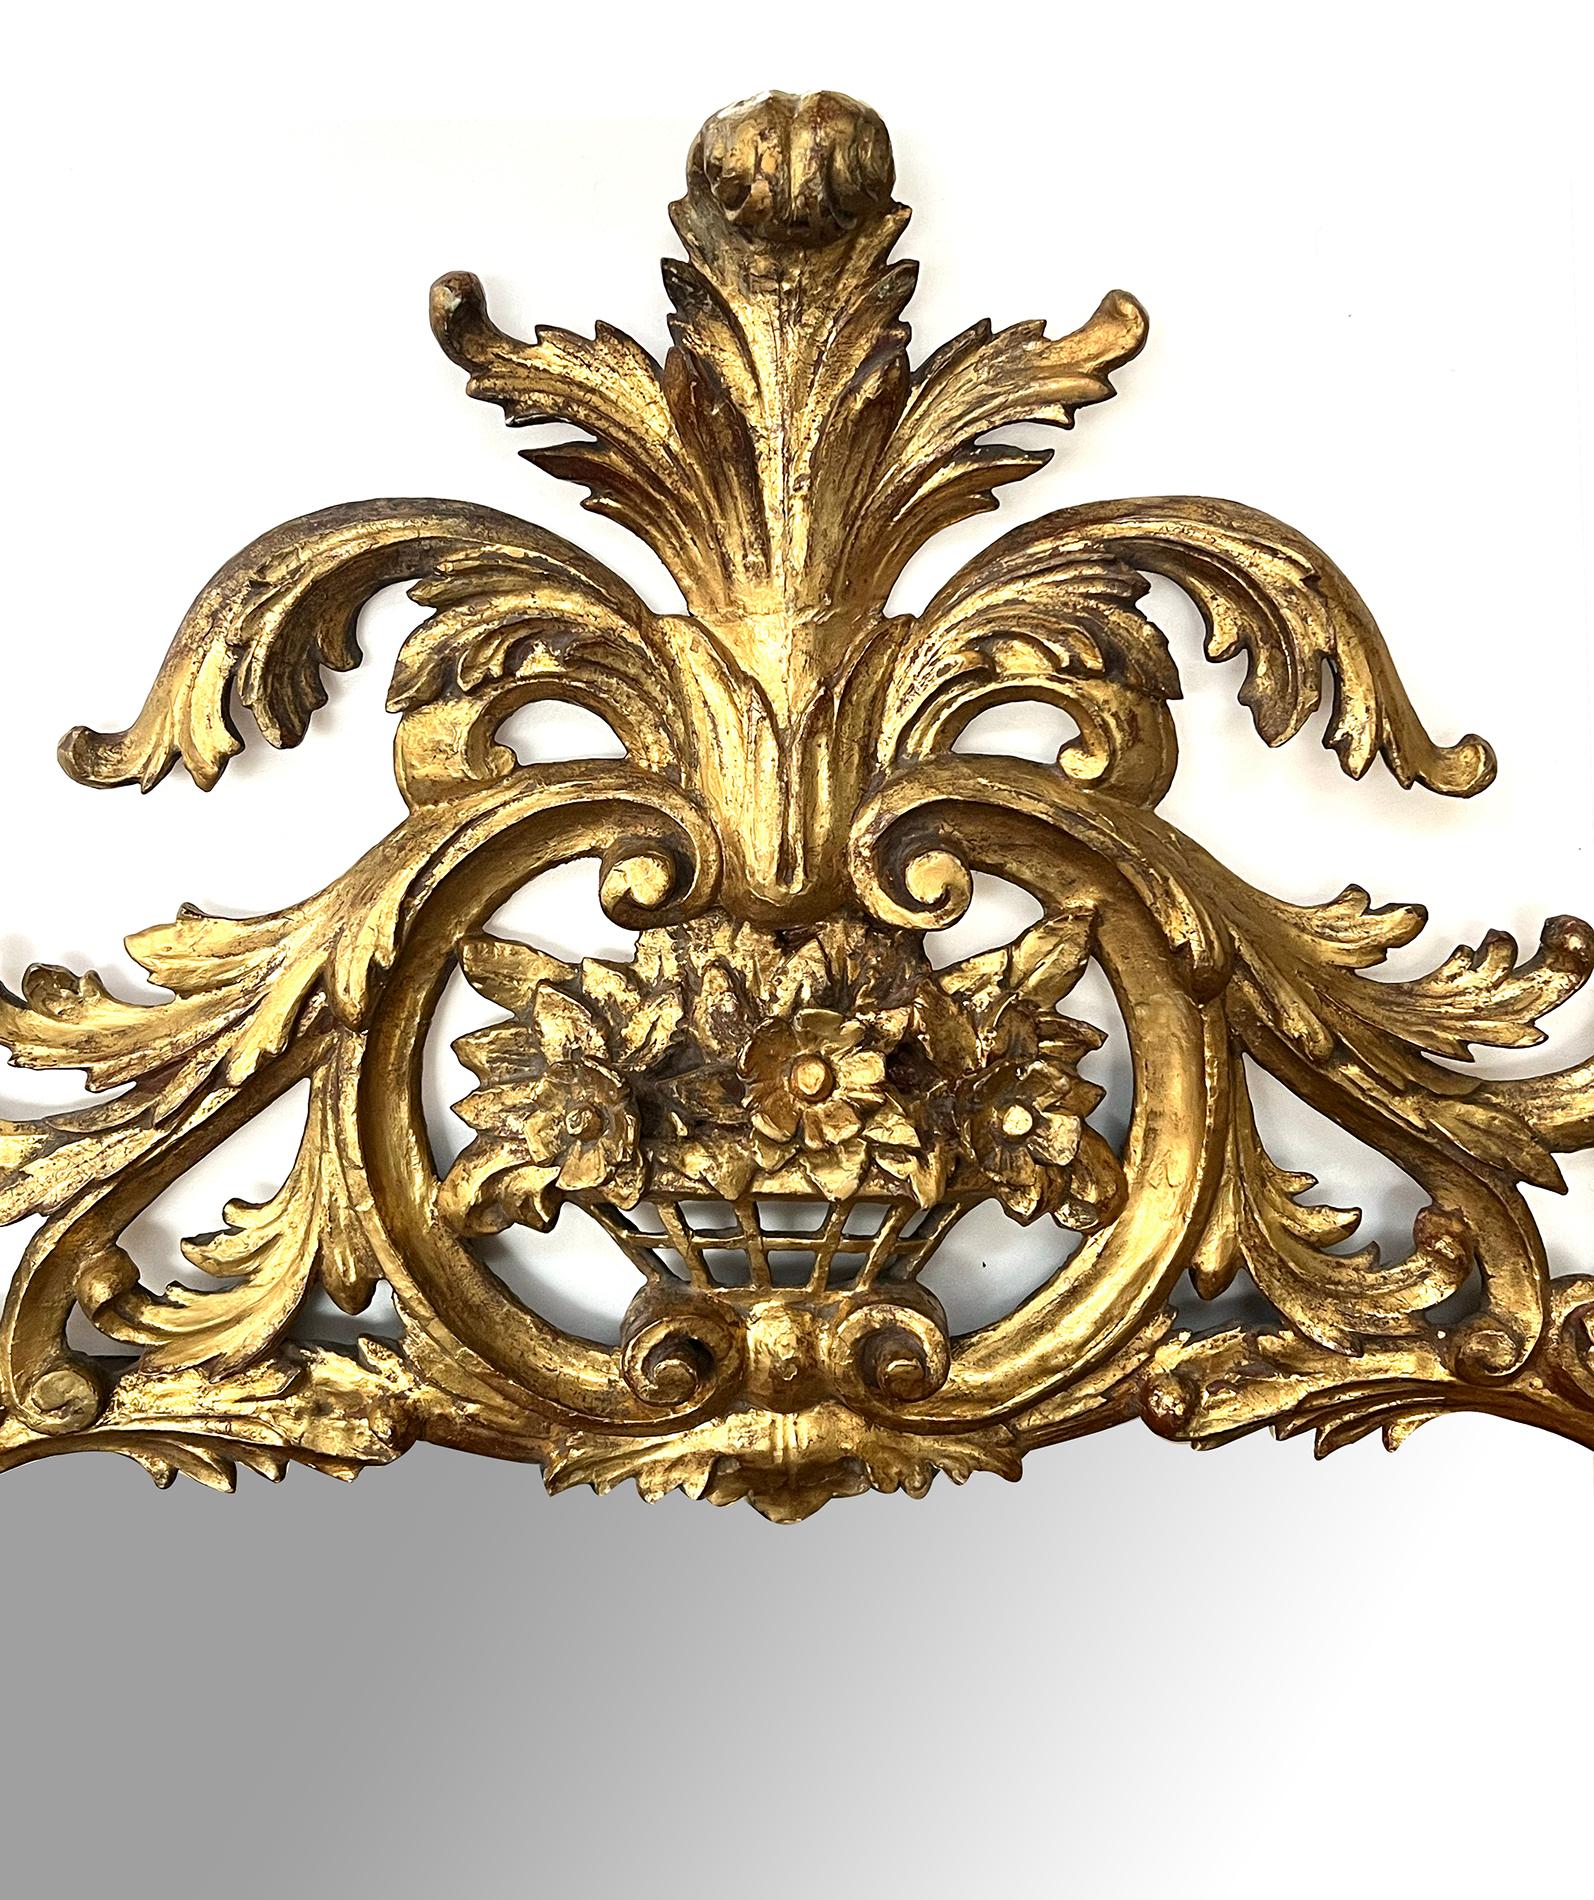 surmounted by a bold foliate crest above an openwork floral basket over a reticulated frame of cascading floral vines, lively acanthus leaves, rocaille and C-scrolls